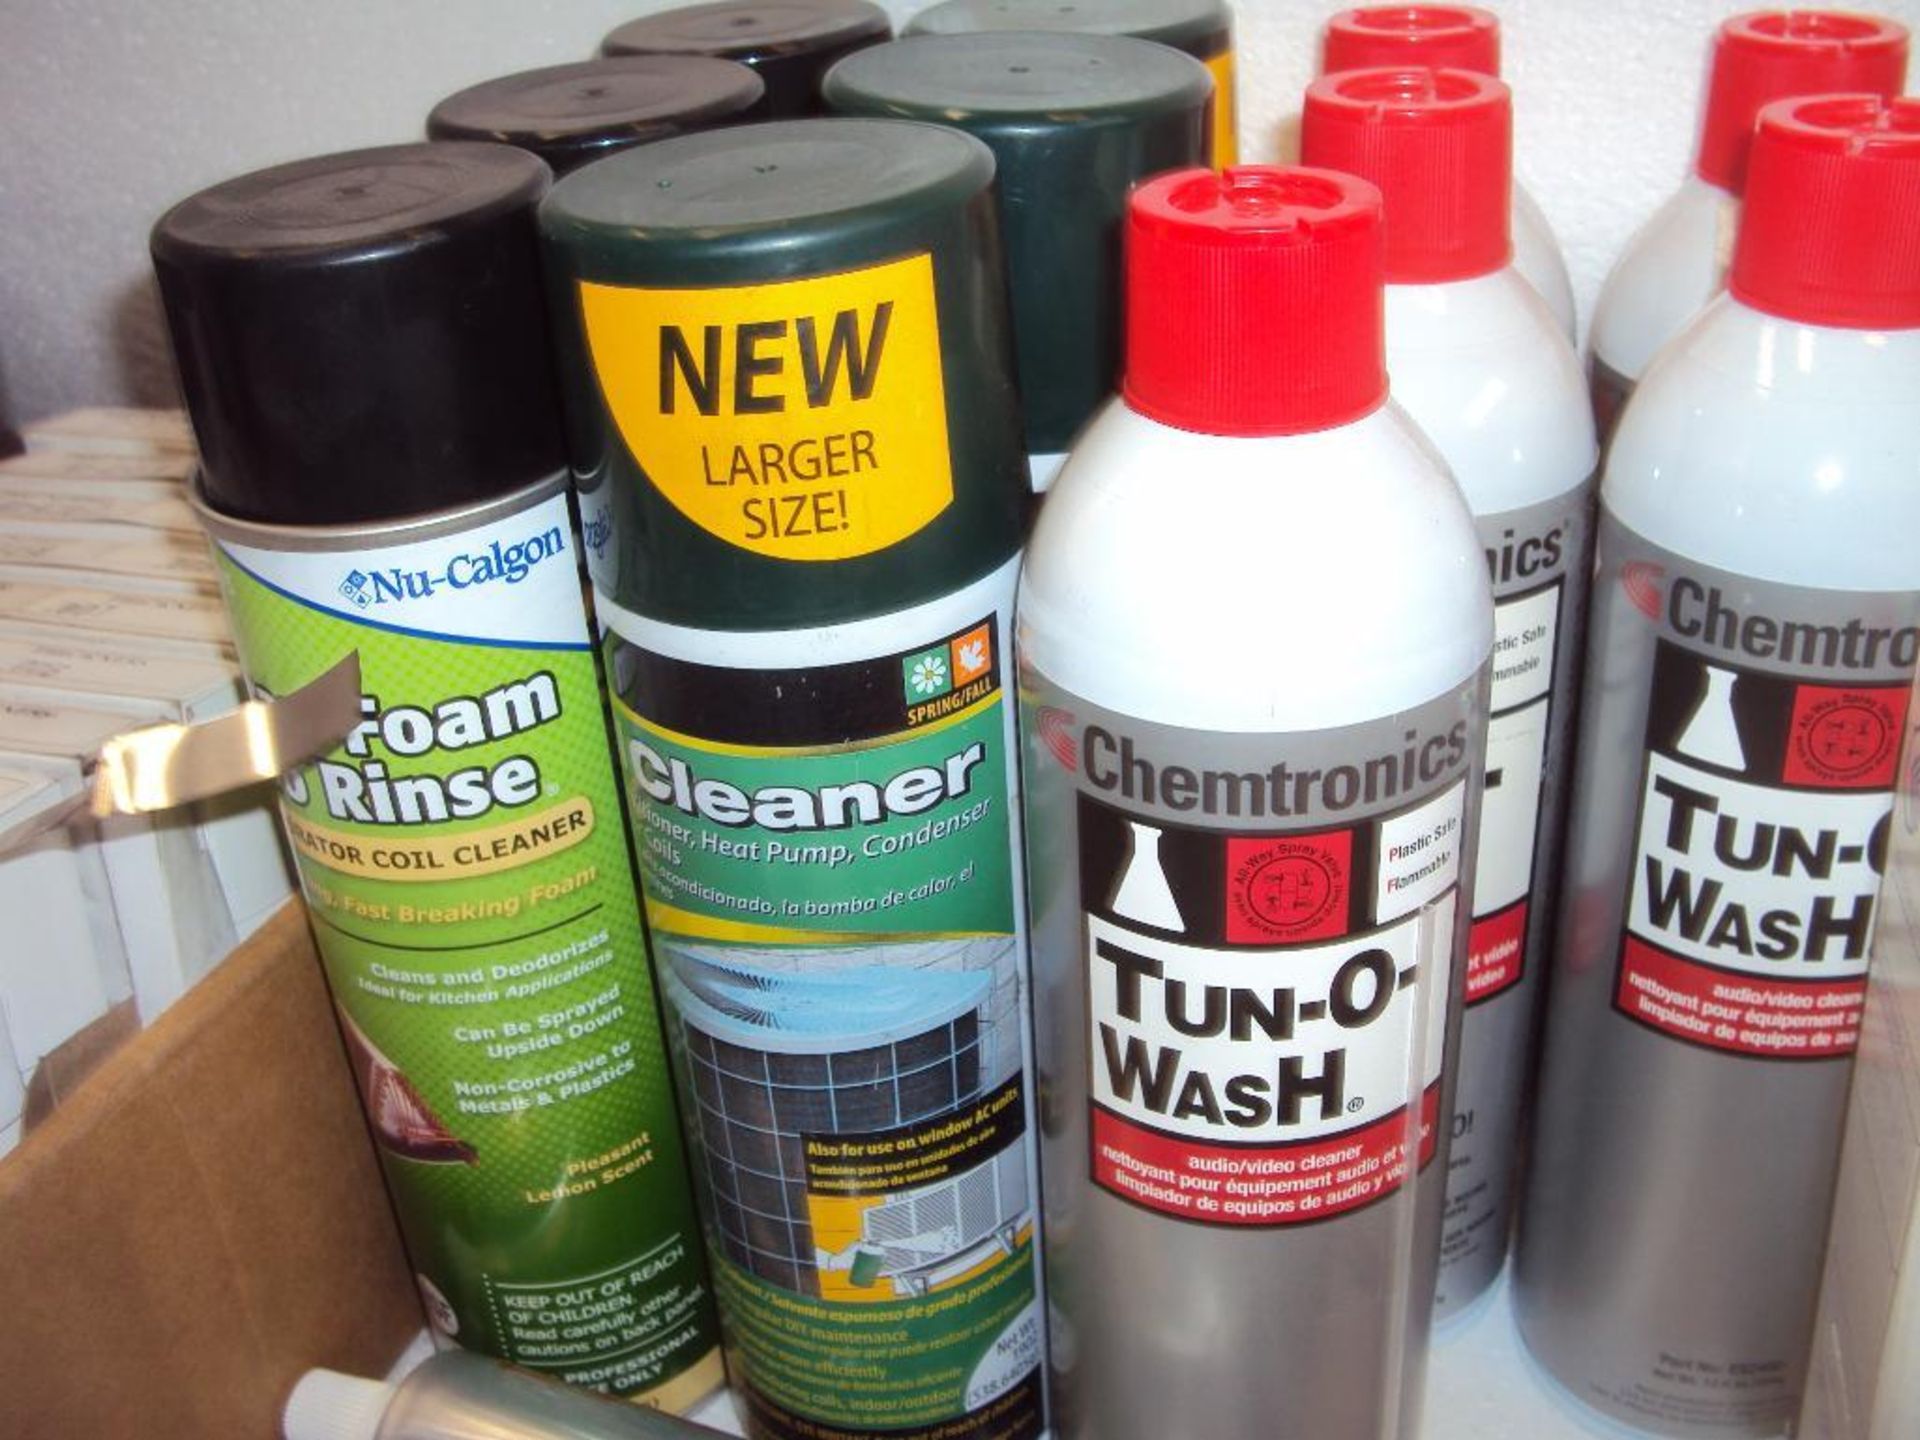 Shop Supplies Signs, cleaners, shim stock and lubricants - Image 4 of 8